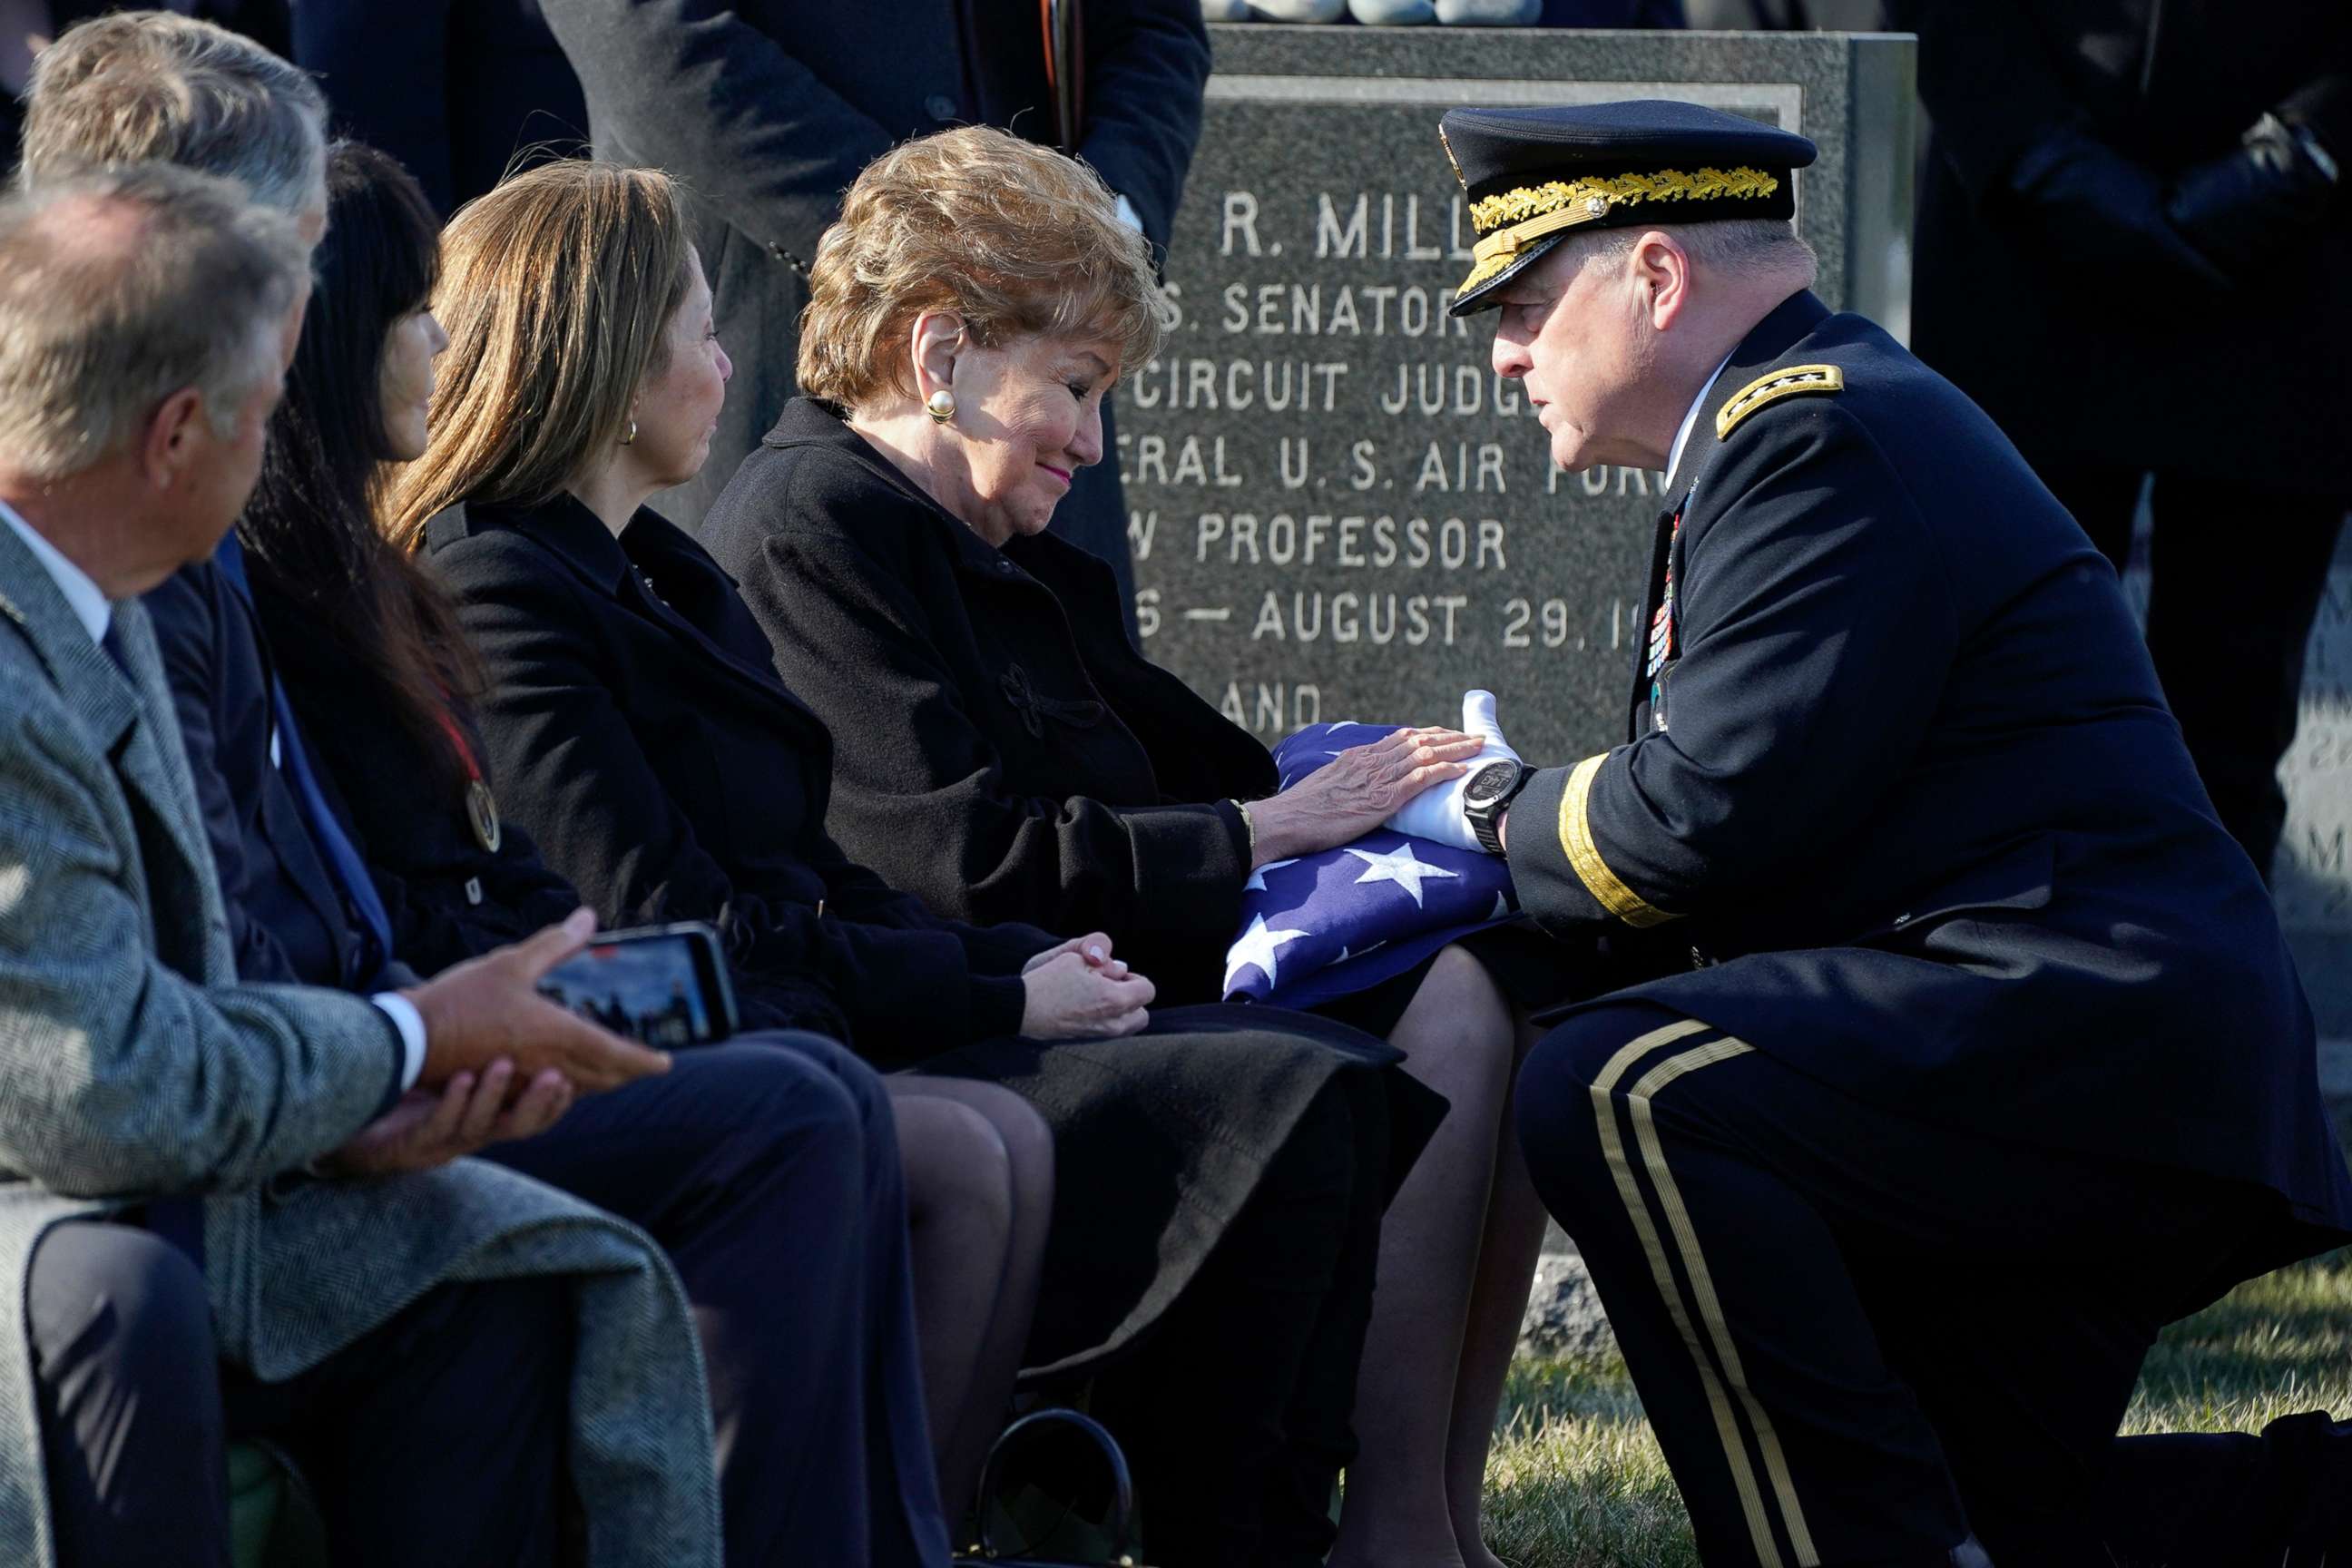 PHOTO: Chairman of the Joint Chiefs of Staff Gen. Mark Milley gives former Sen. Elizabeth Dole, a folded U.S. flag during the burial service for her late husband Bob Dole, at Arlington National Cemetery in Arlington, Va., Feb. 2, 2022.